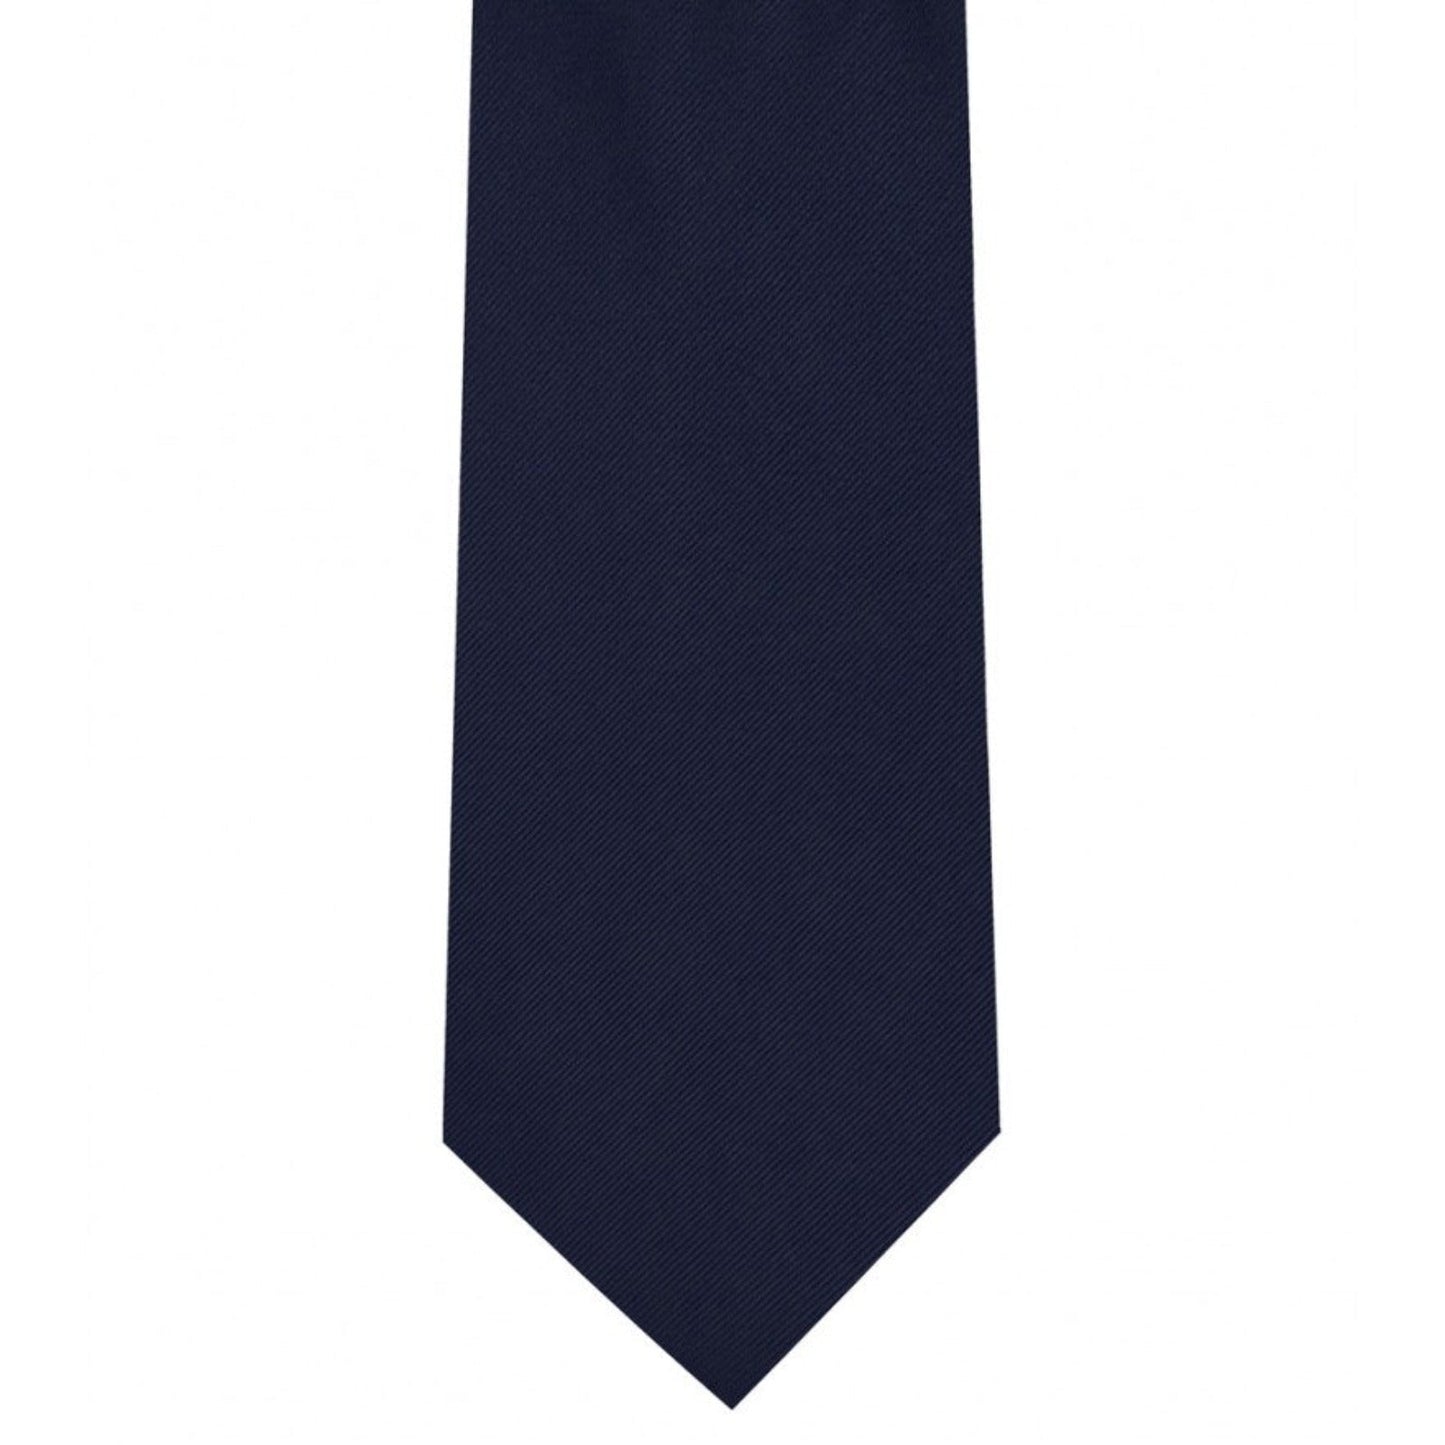 Classic Dark Navy Tie Ultra Skinny tie width 2.25 inches With Matching Pocket Square | KCT Menswear